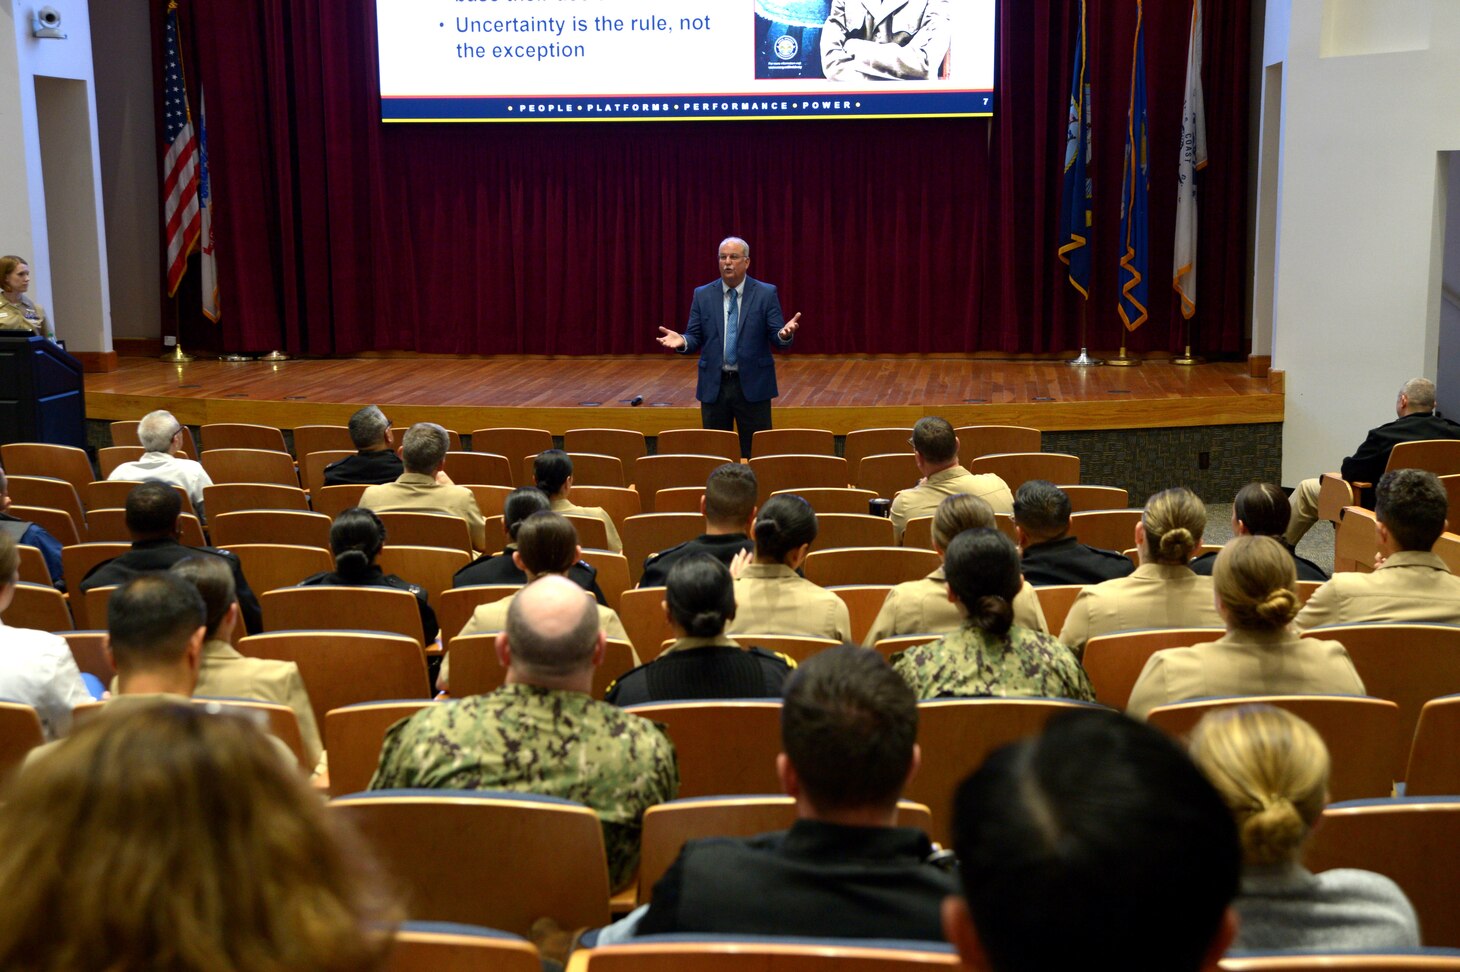 Retired U.S. Navy Rear Adm. Bruce Gillingham speaks to team members at Naval Medical Center San Diego as part of National Doctor's Day, March 29, 2024. Navy Medicine Readiness and Training Command San Diego’s mission is to prepare service members to deploy in support of operational forces, deliver high quality healthcare services and shape the future of military medicine through education, training and research. NMRTC San Diego employs more than 6,000 active duty military personnel, civilians and contractors in Southern California to provide patients with world-class care anytime, anywhere. (U.S. Navy photo by Mass Communication Specialist 2nd Class Jacob Woitzel)